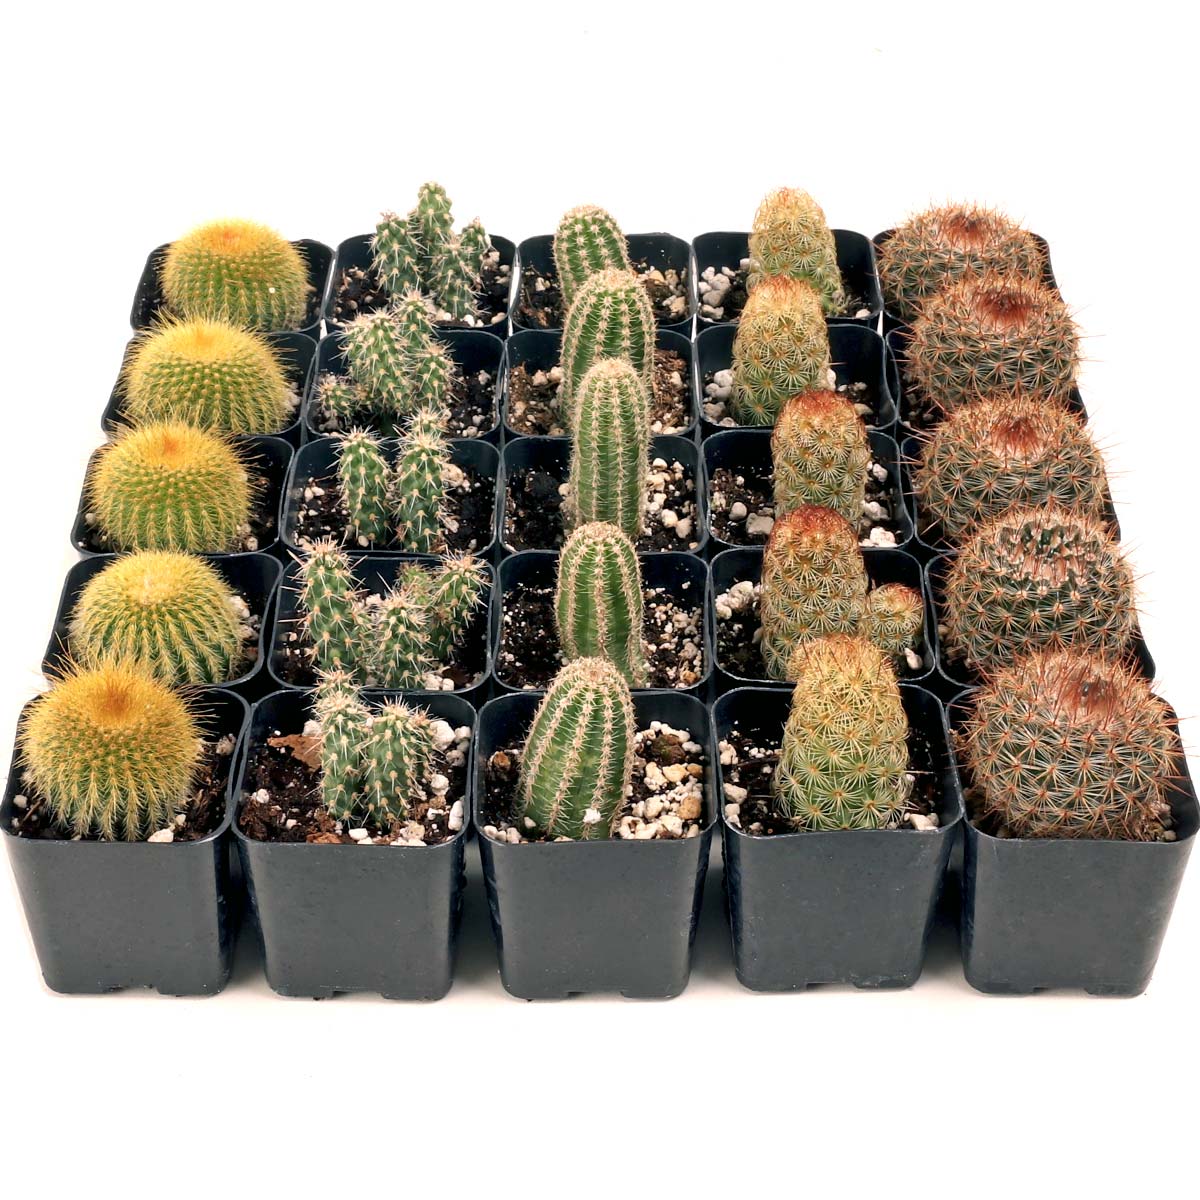 Will Cactus live under fluorescent or led lighting?